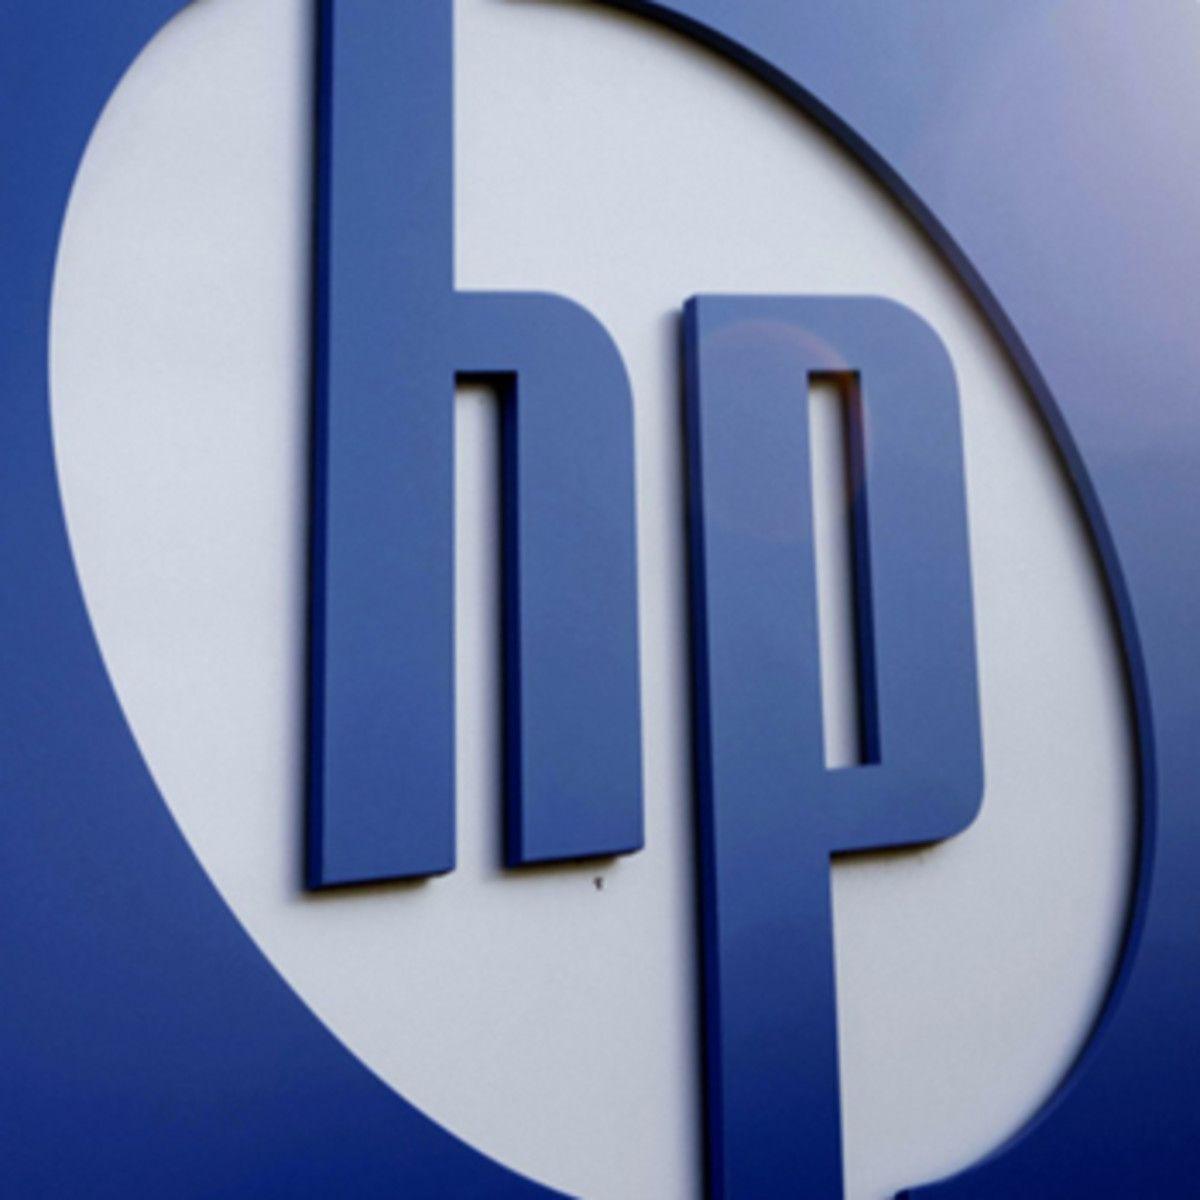 HP Services Logo - CSC to merge with enterprise services segment of HPE to create $26bn